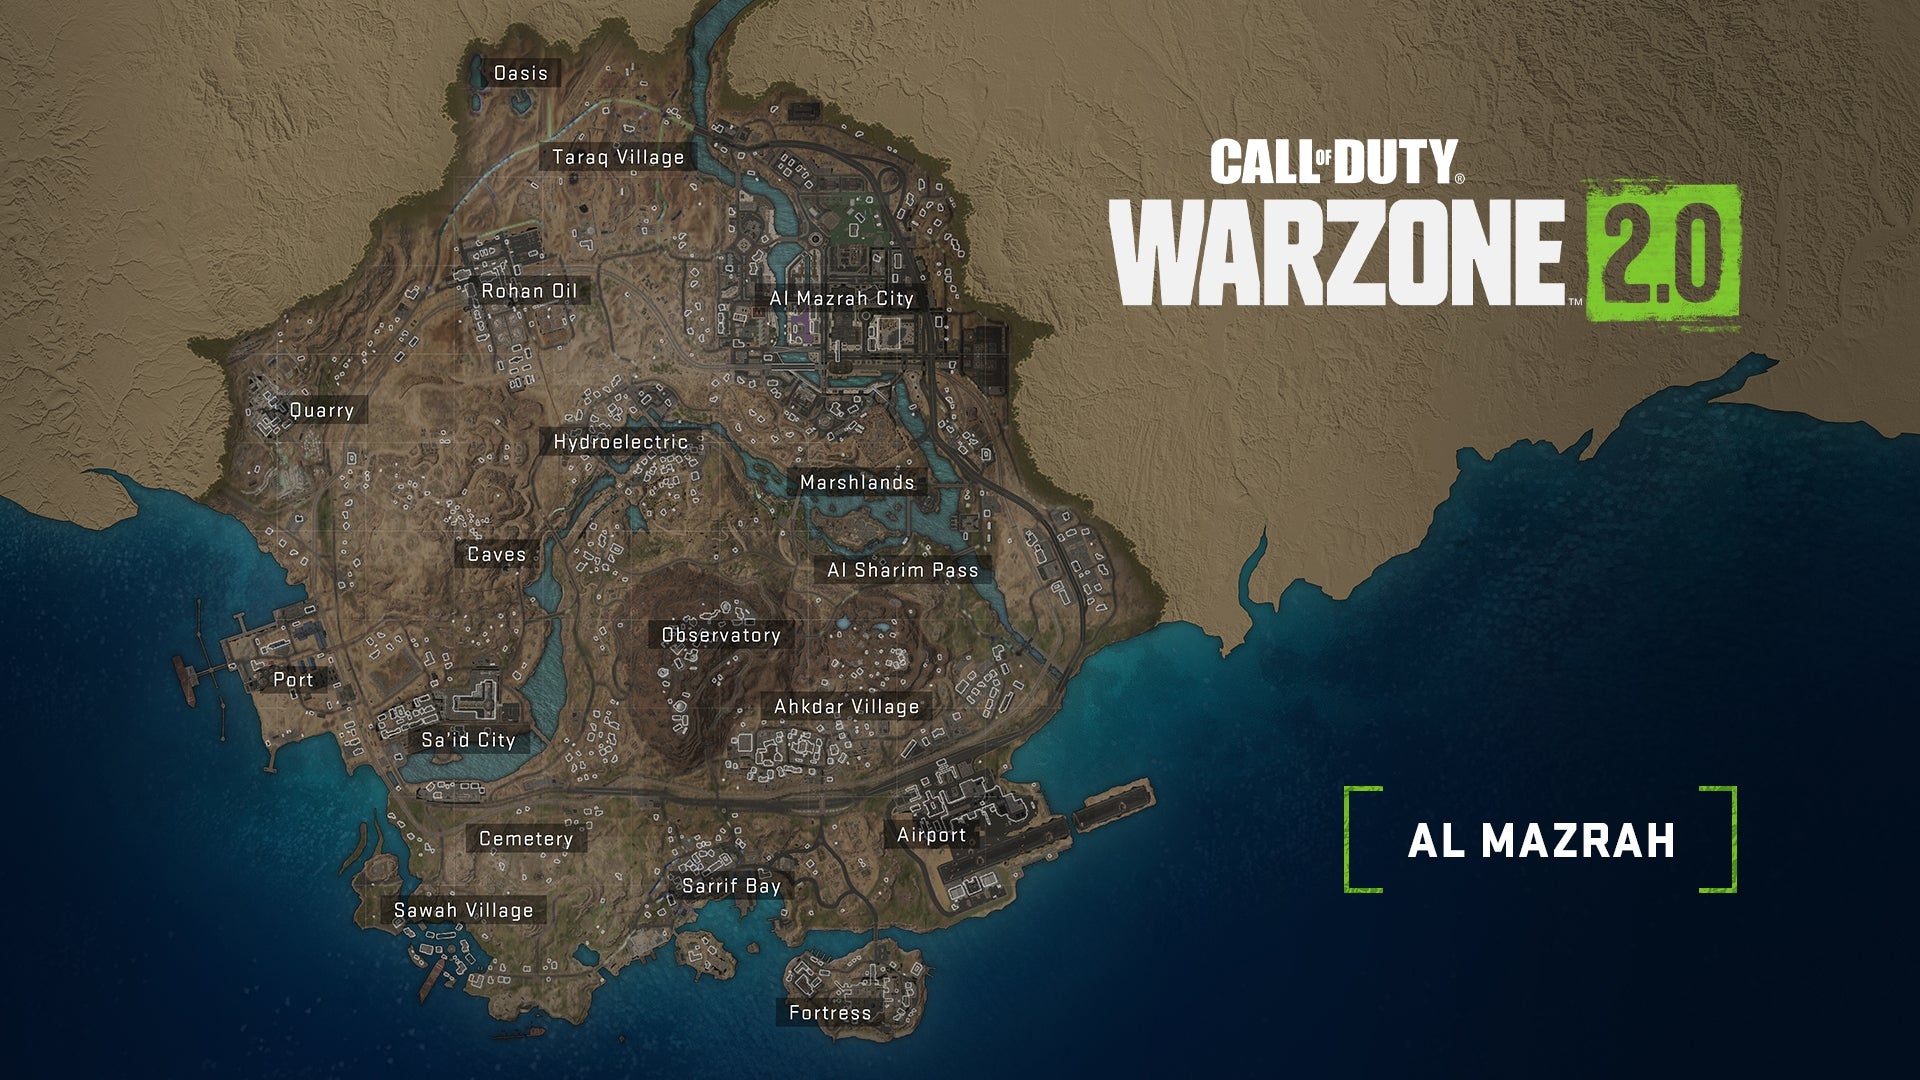 Call Of Duty: Warzone 2's new map, Al Mazrah.